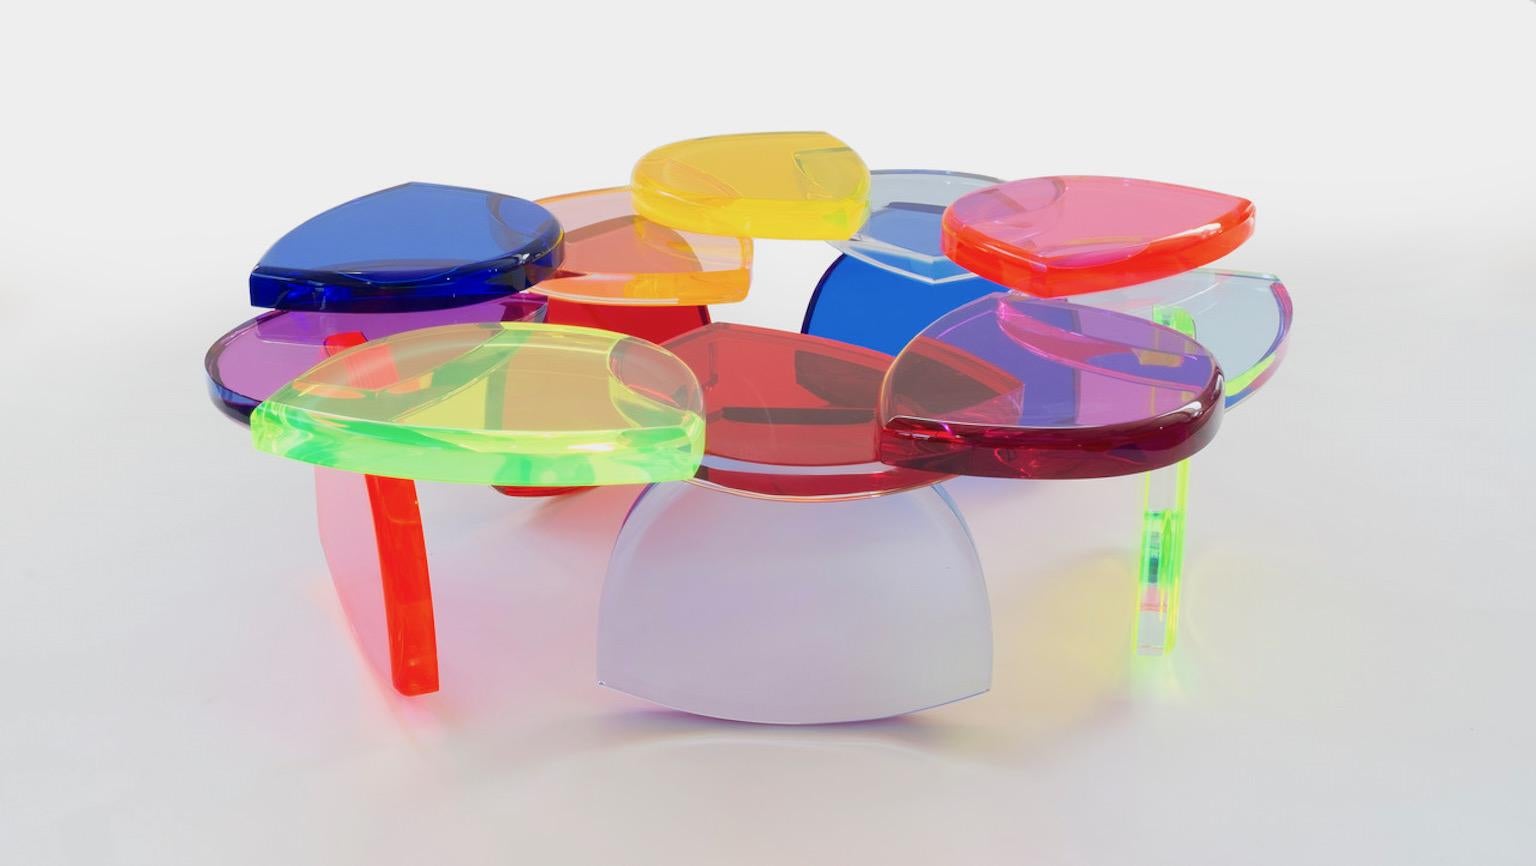 A beautiful coffee table with a structure of colored sequences of plexiglass modules that are repeated by building the shape.
A series of unique pieces designed by Studio Superego with collaboration of Marco Pettinari for Superego Editions.
Each